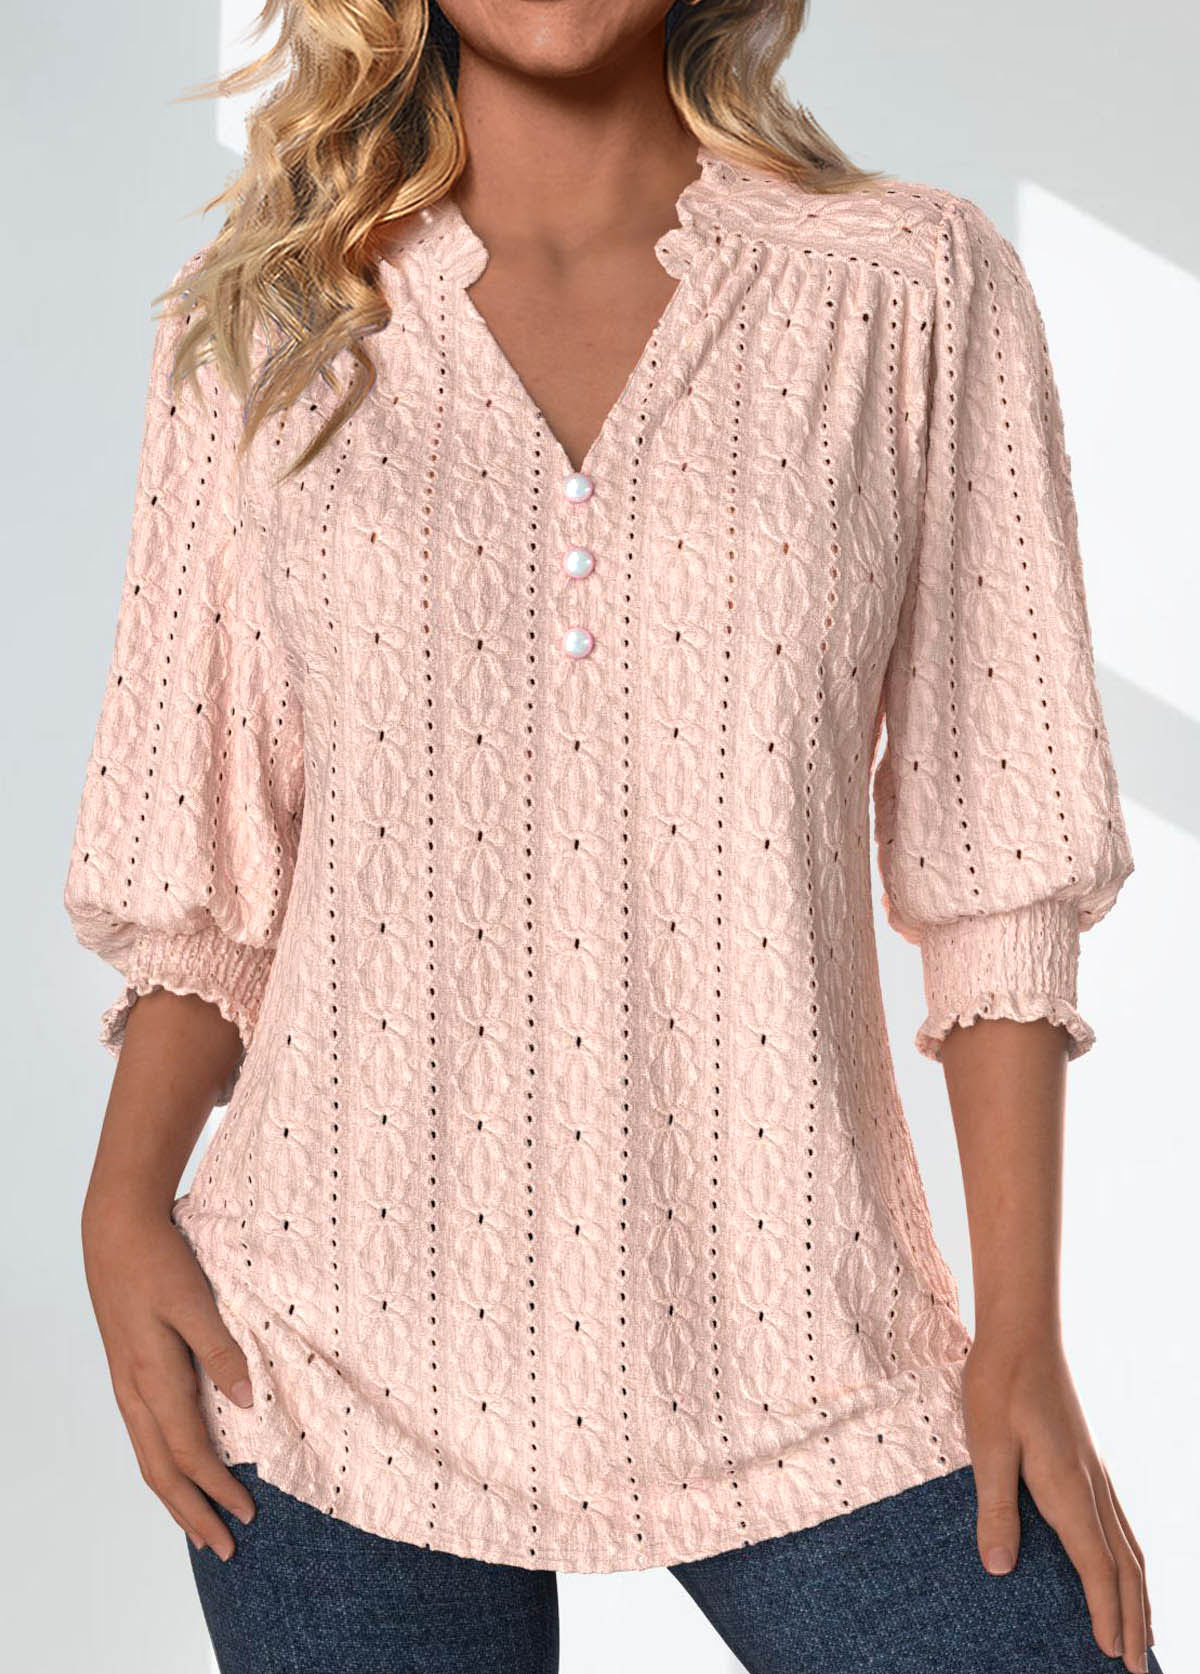 Plus Size Light Pink Textured Fabric 3/4 Sleeve Blouse